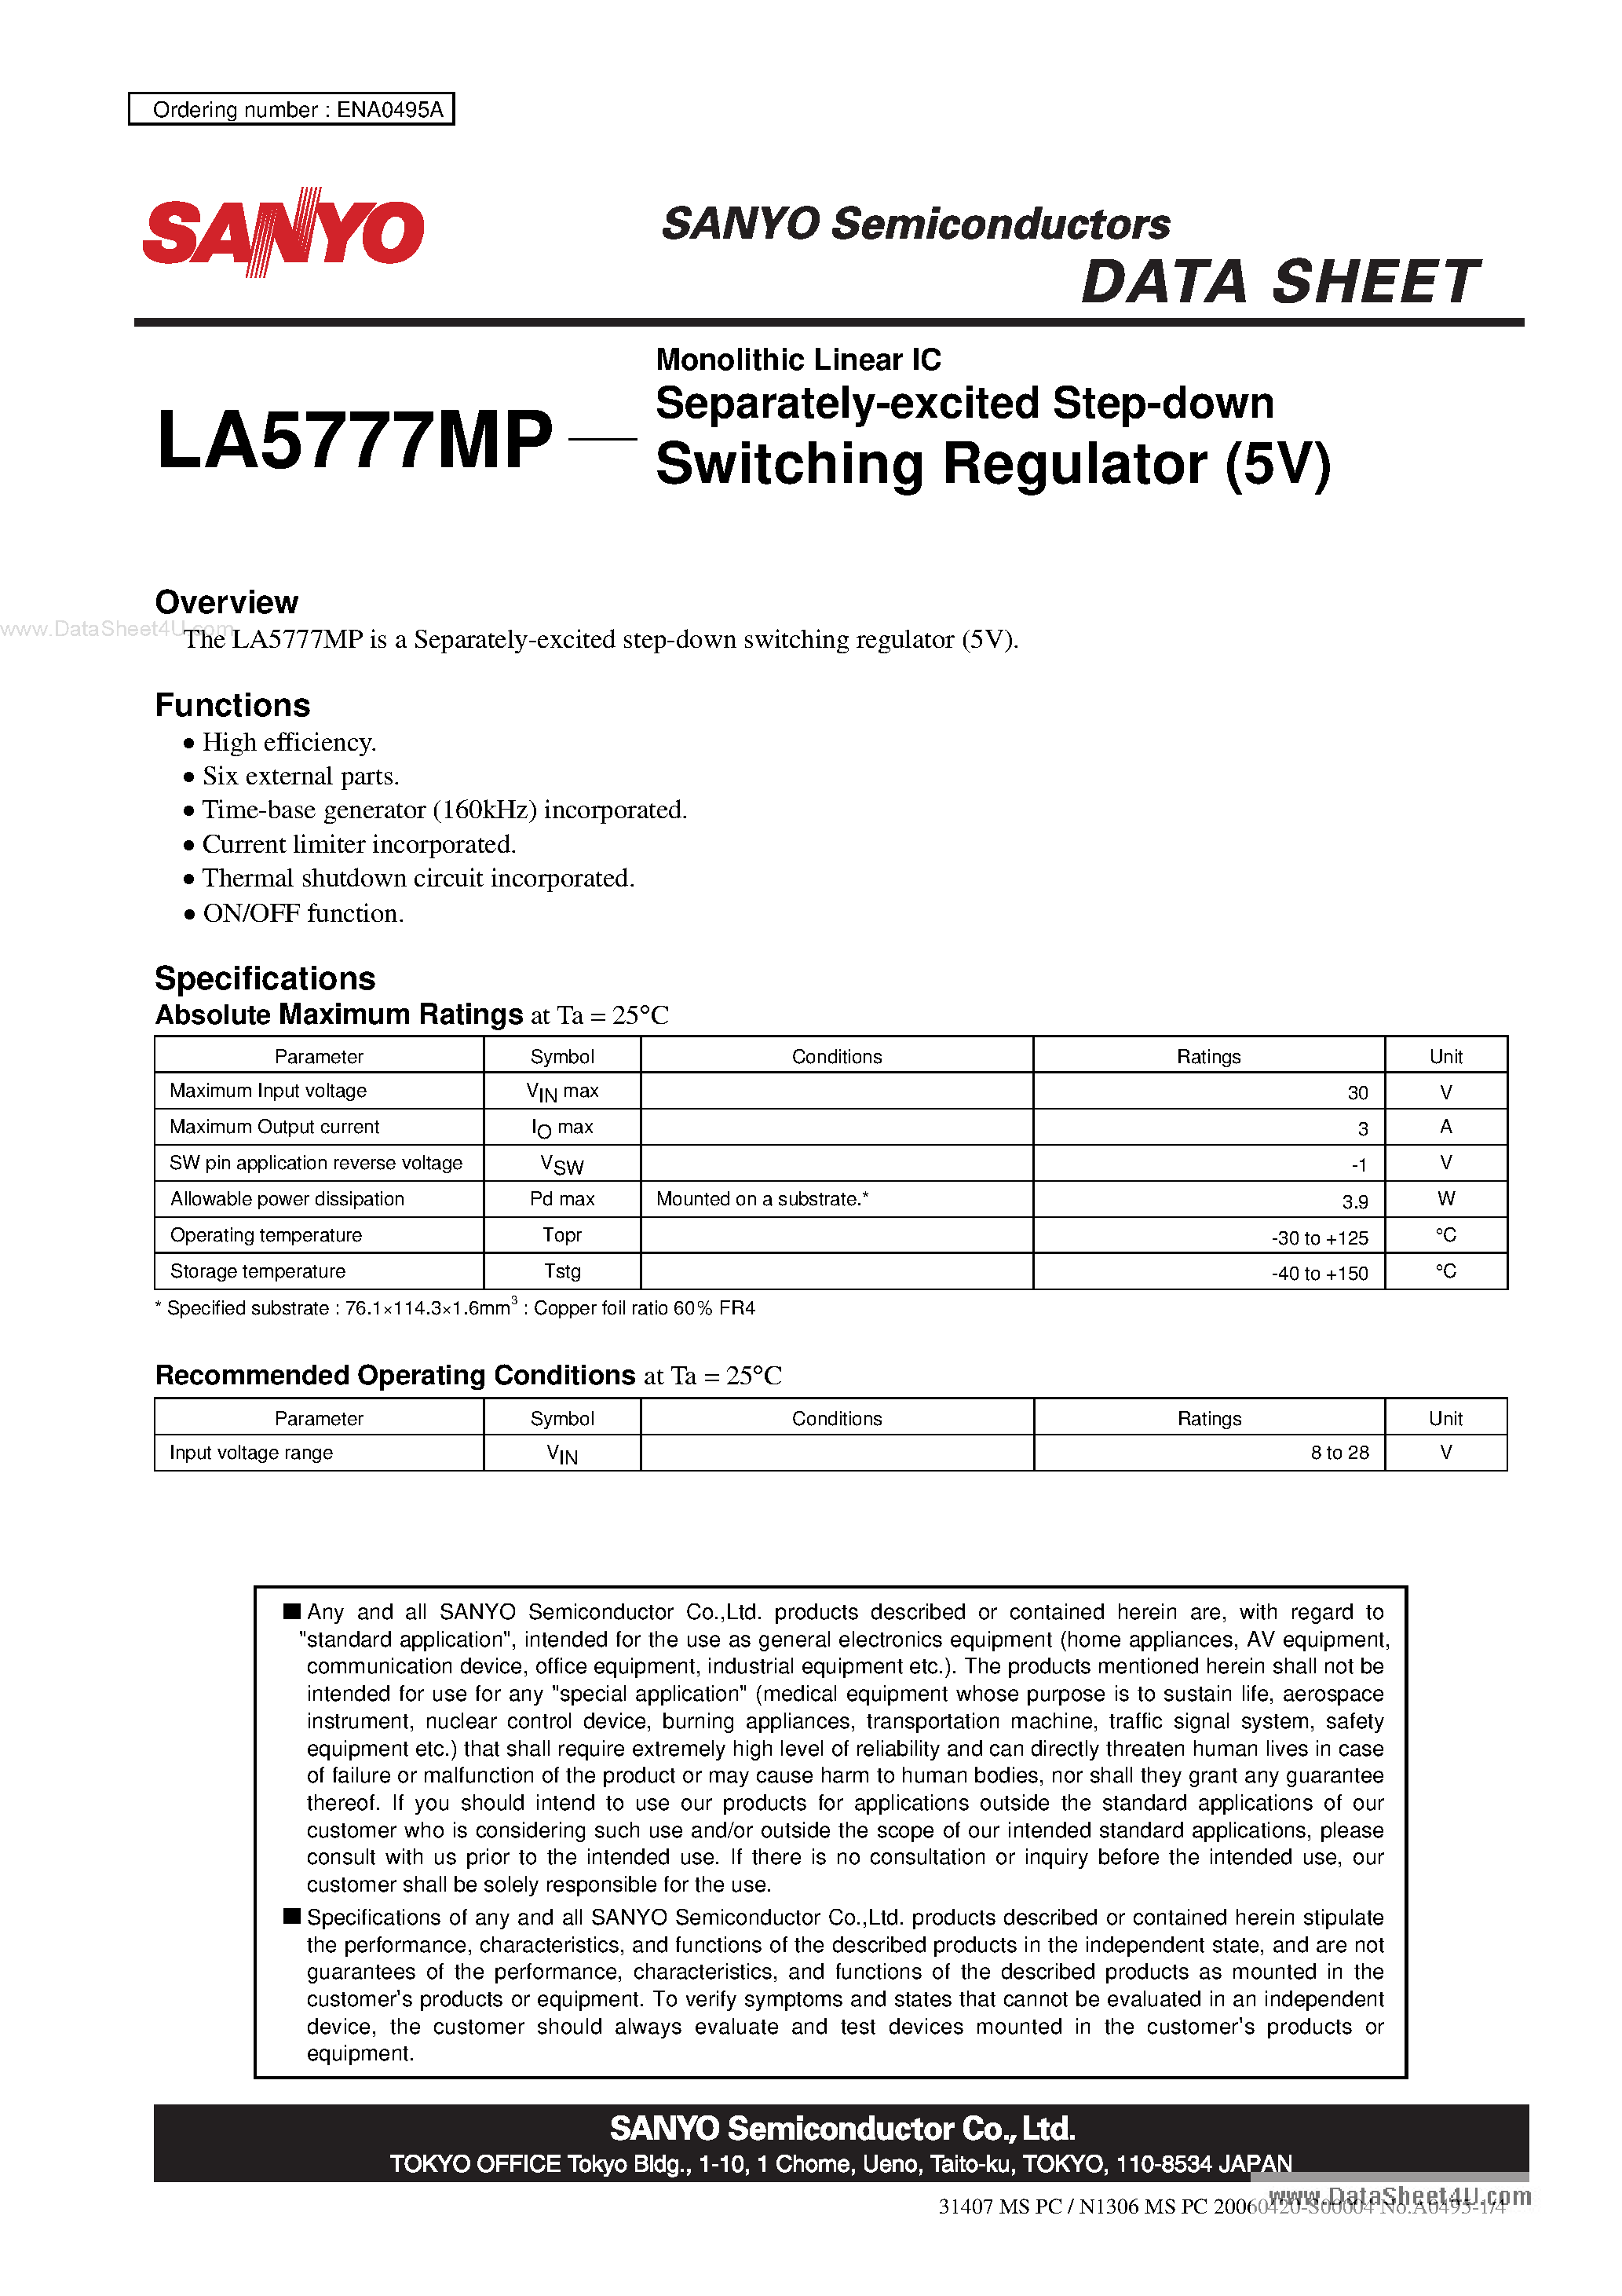 Даташит LA5777MP - Monolithic Linear IC Separately-excited Step-down Switching Regulator страница 1